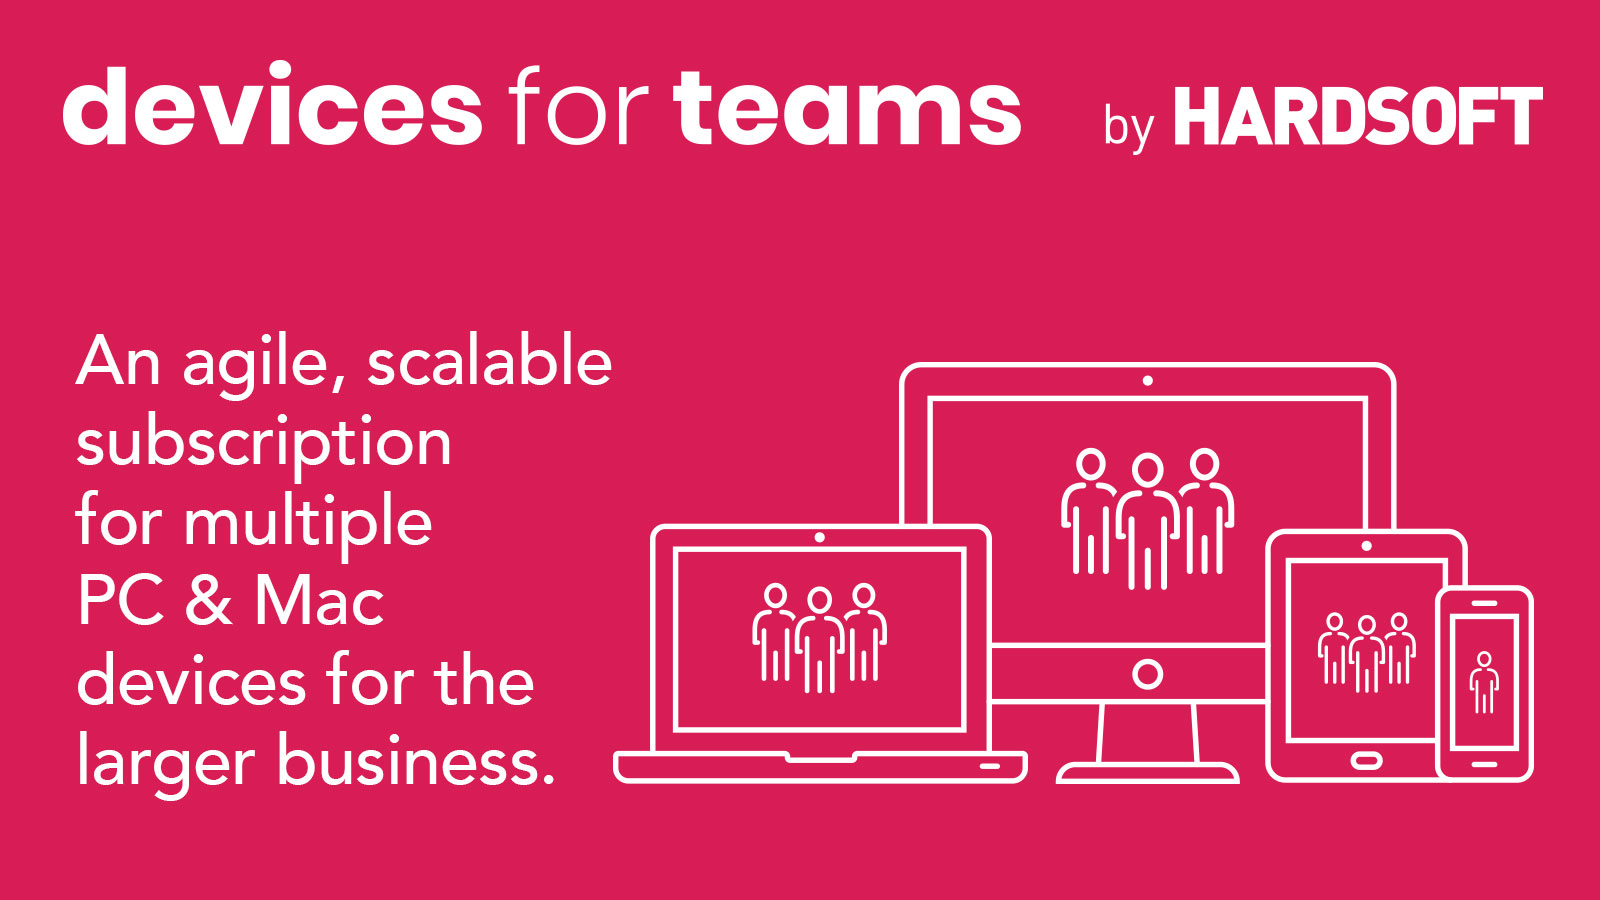 Devices for Teams, HardSoft